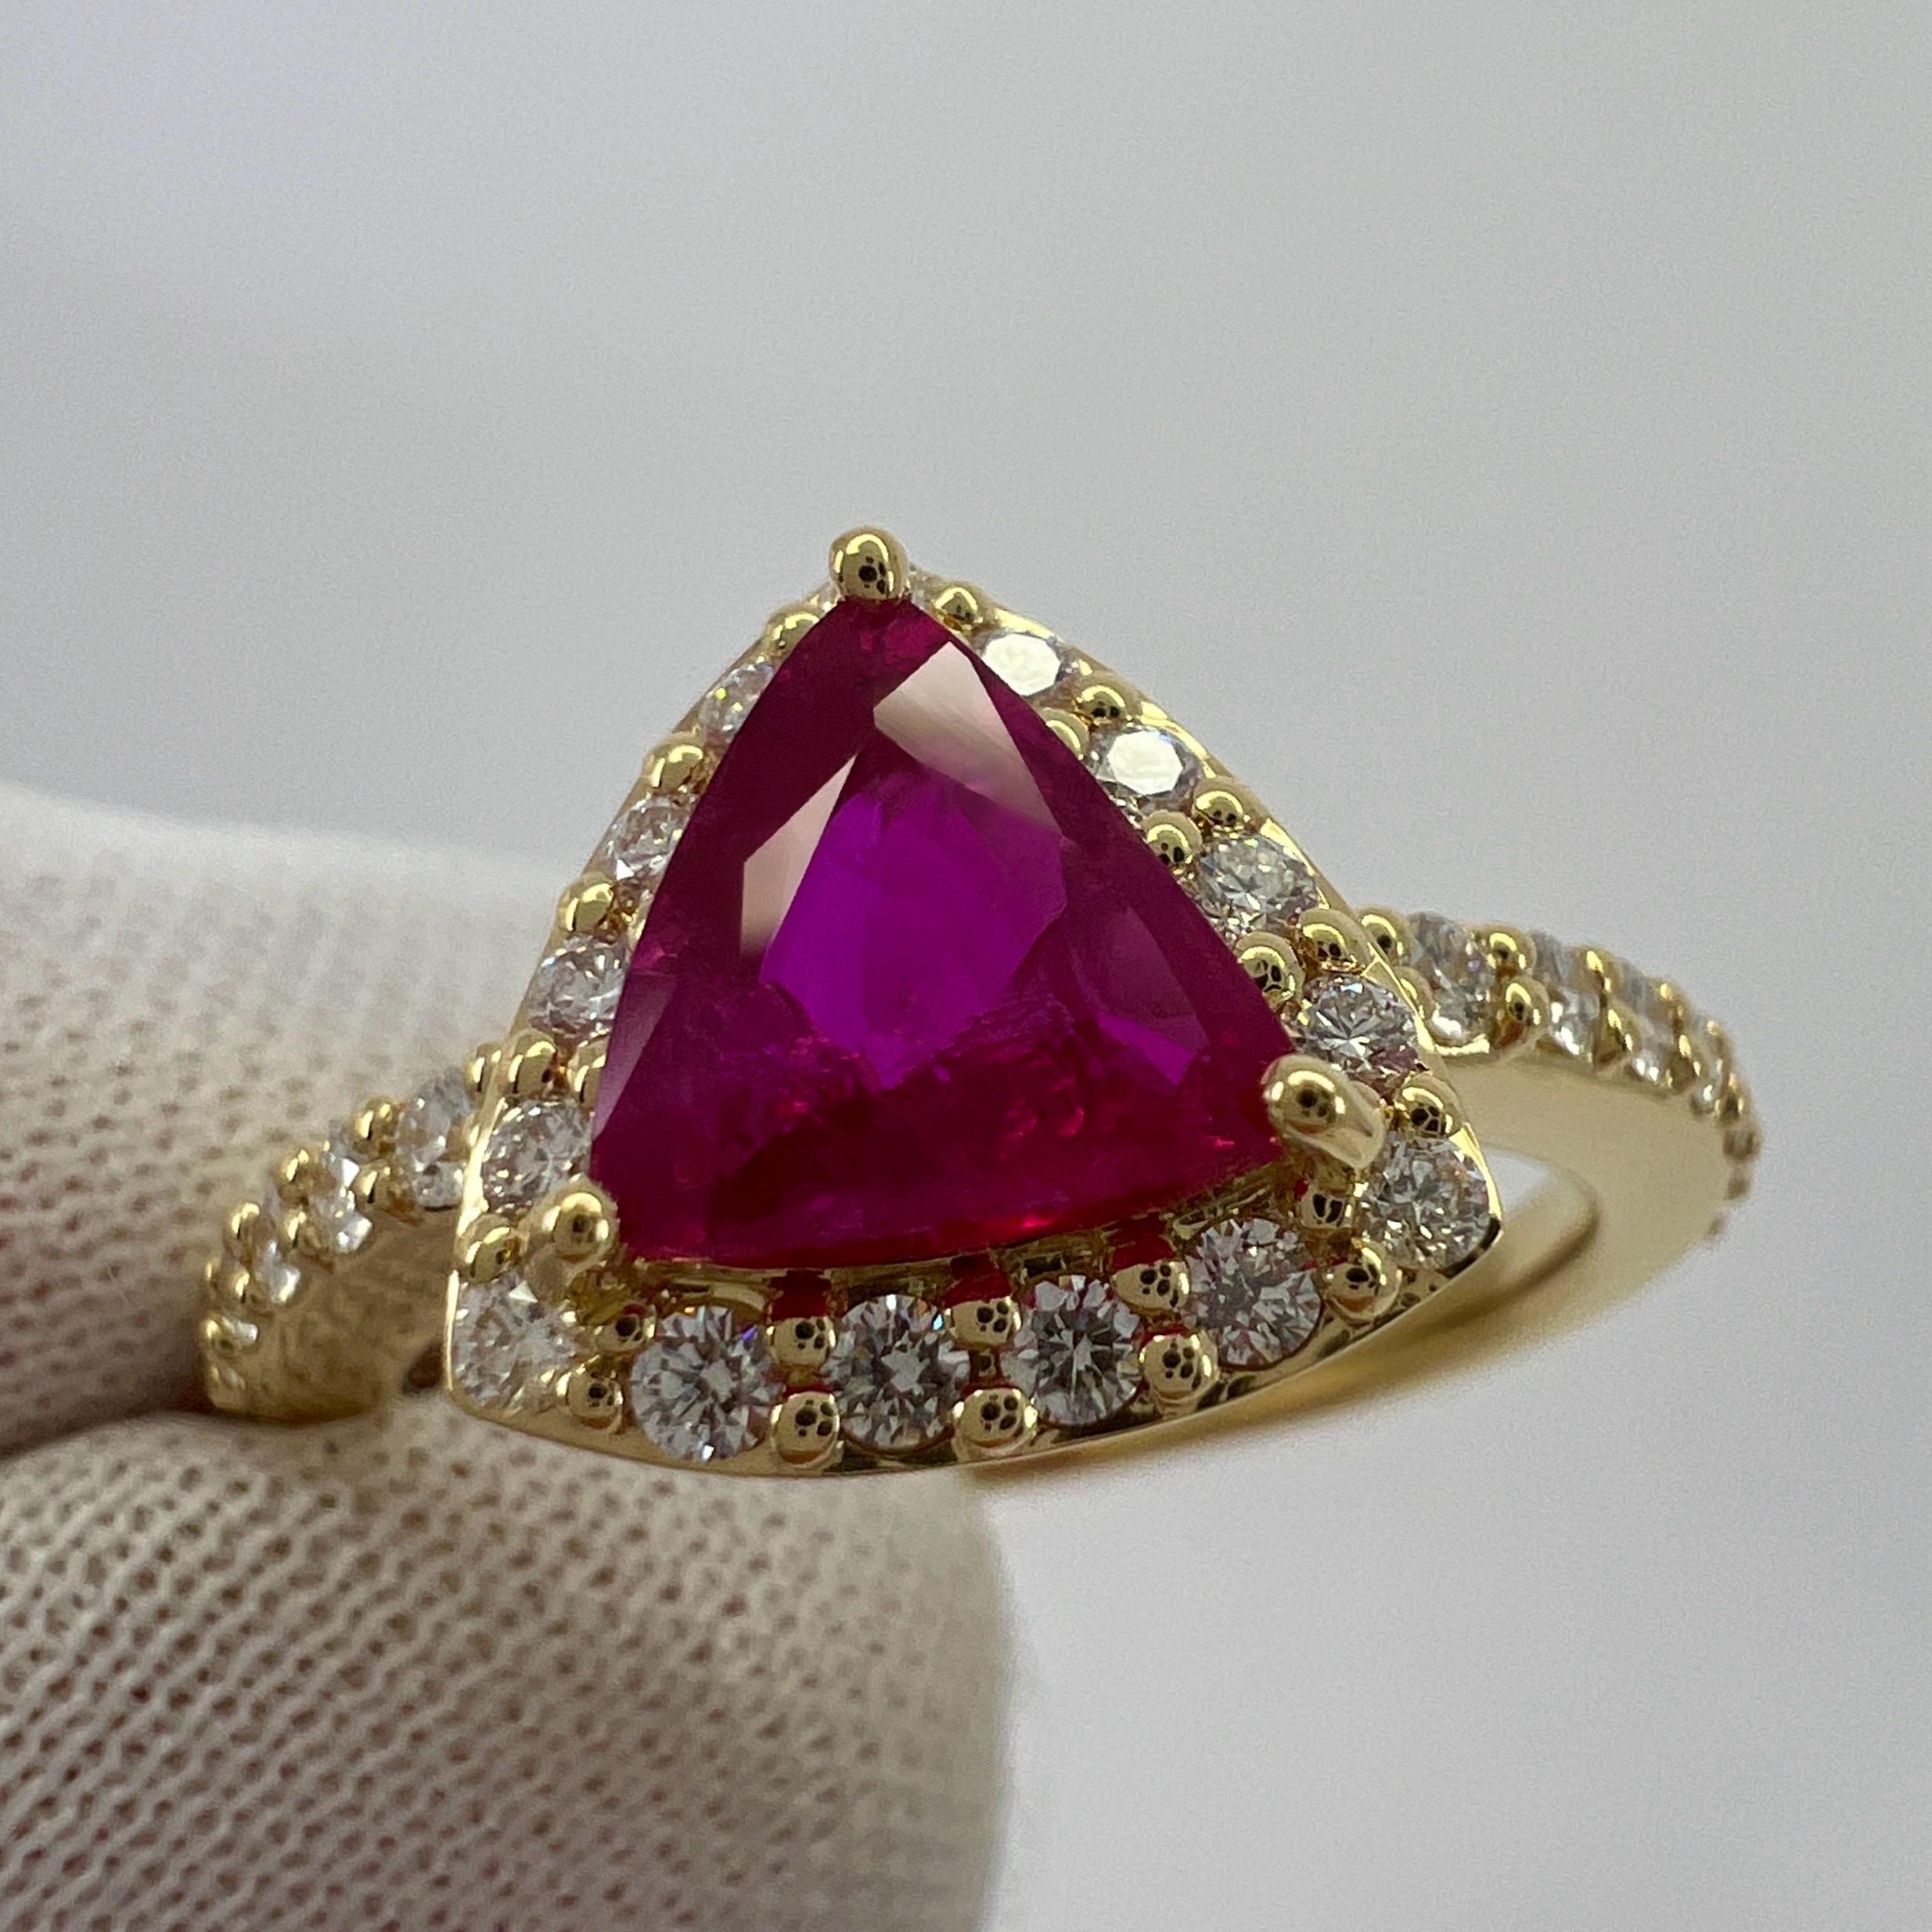 Nature Vivid Pinkish Red Untreated Ruby & Diamond 18k Yellow Gold Triangle Cut Cluster Halo Ring.

1.02 Carat vivid pinkish red triangle cut natural ruby unheated set in a fine made yellow gold cluster ring. 
Ce rubis a une belle couleur rose rouge